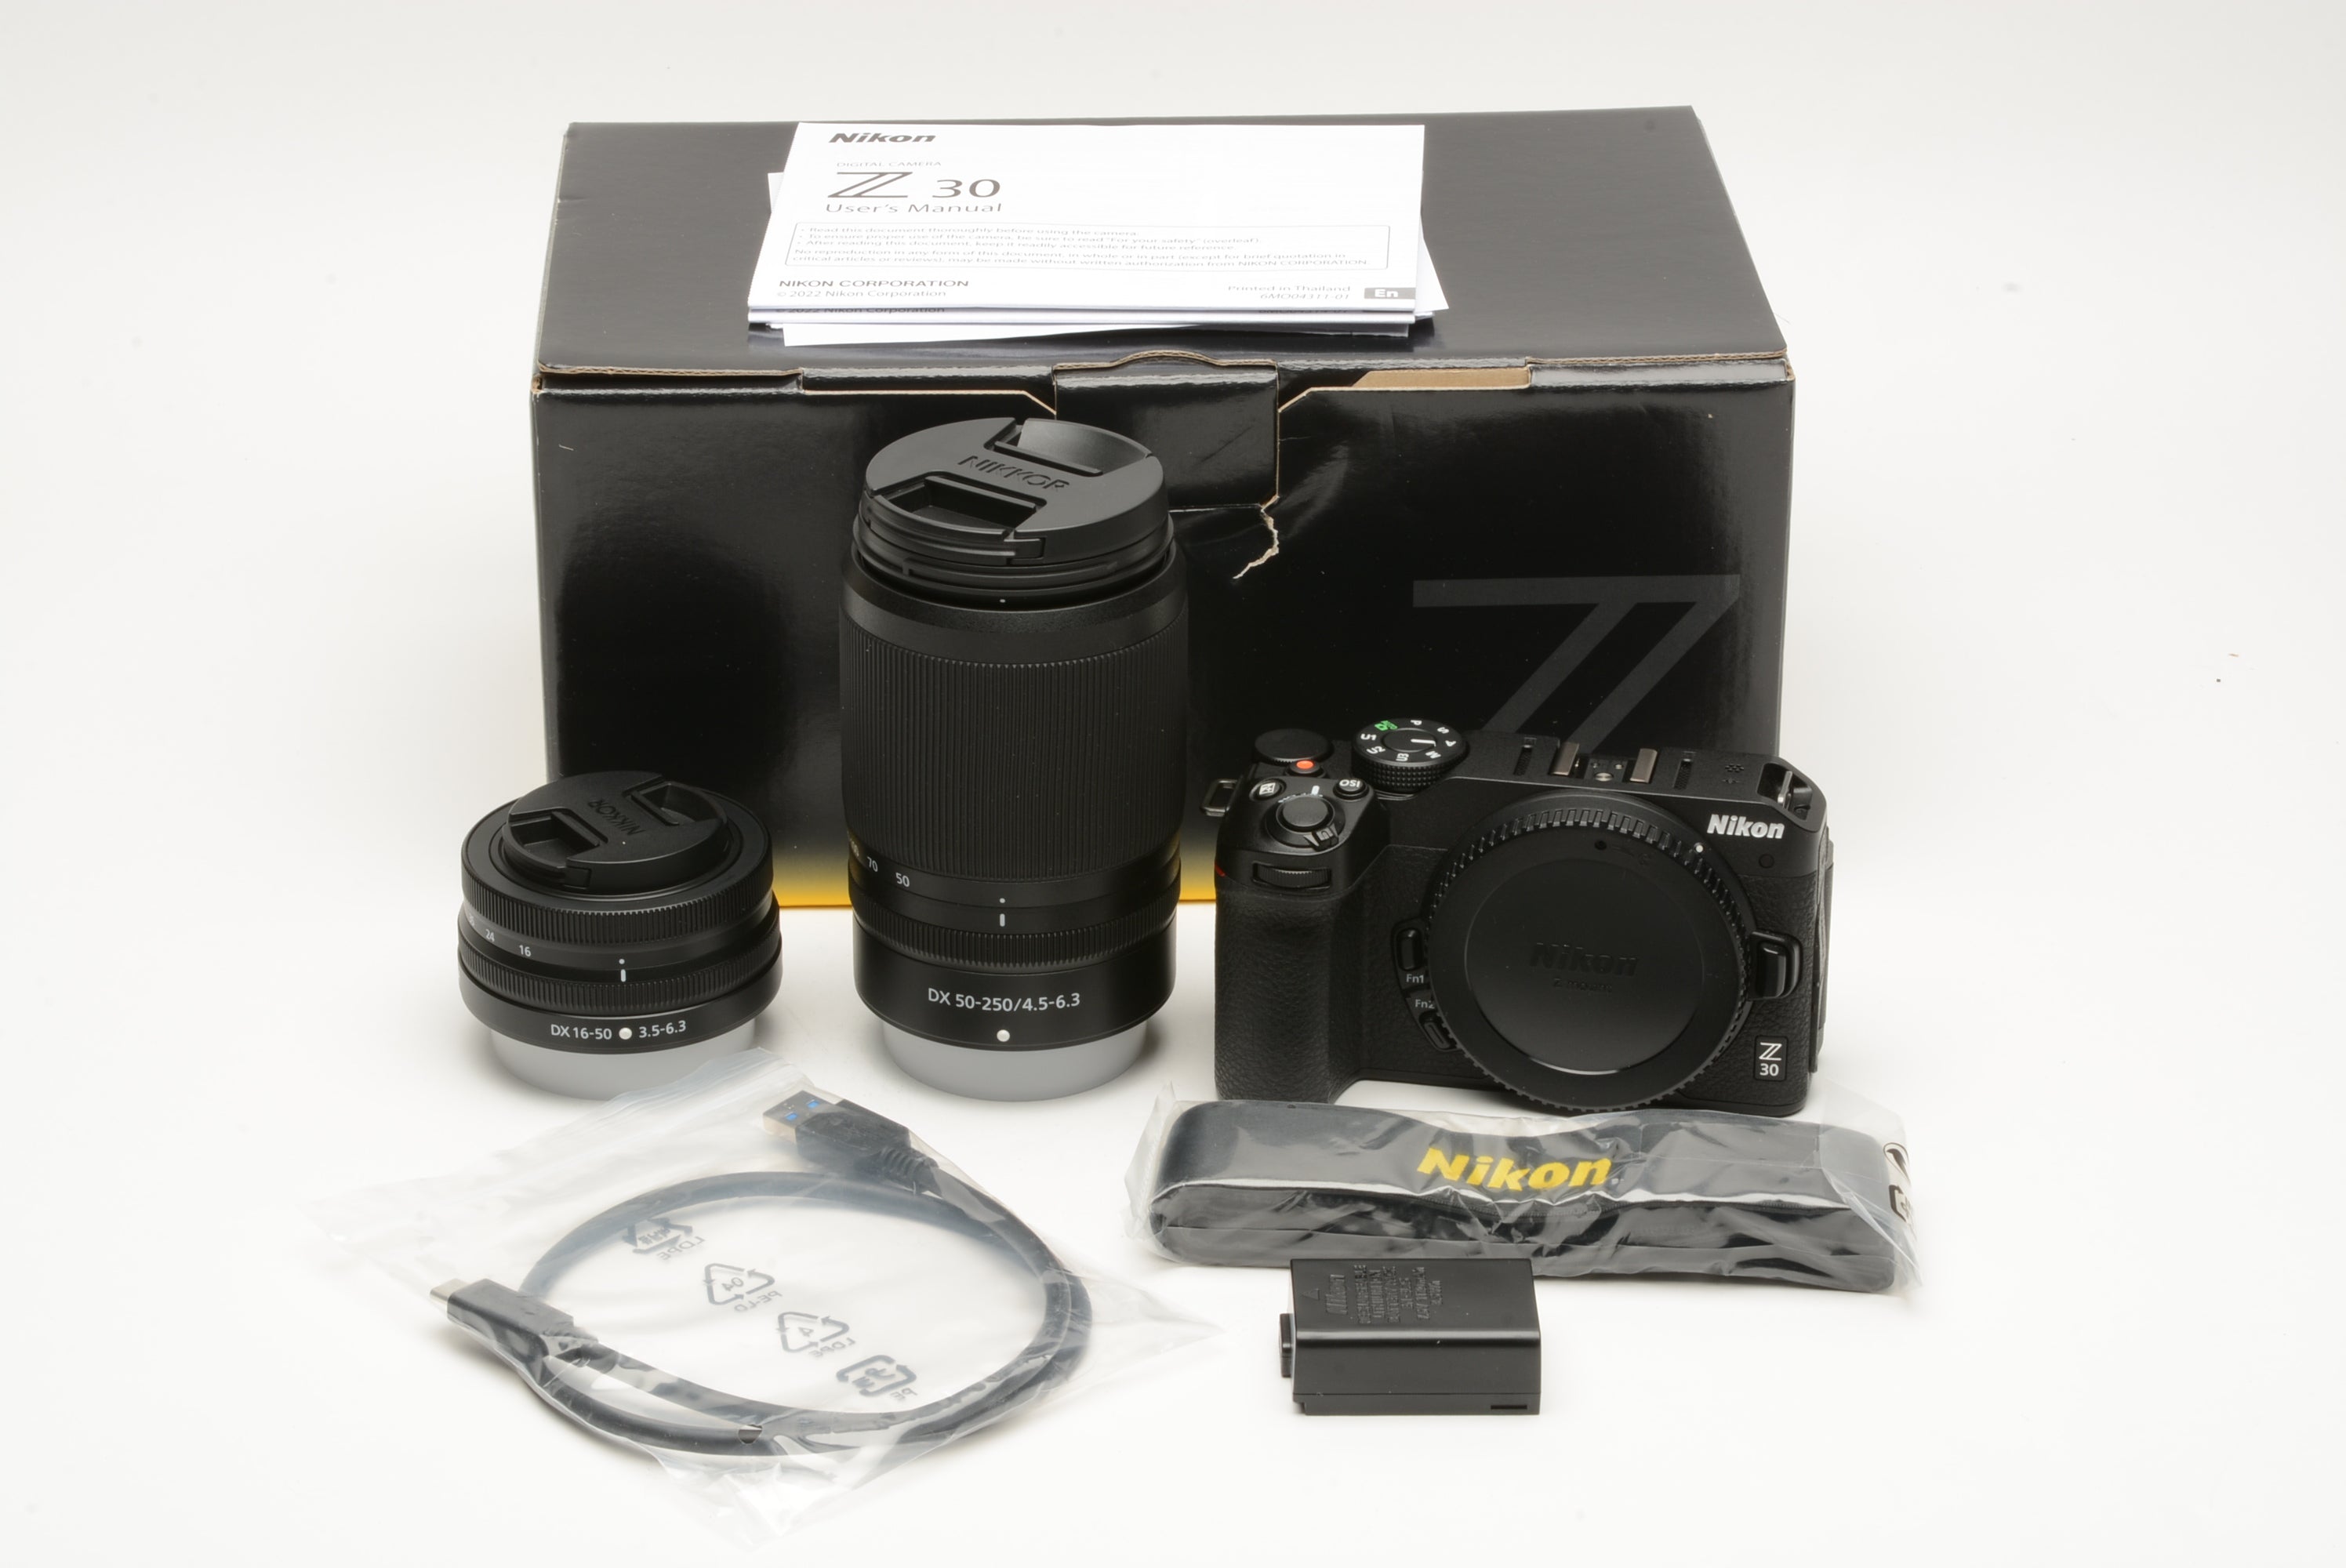 Nikon Z30 Mirrorless Camera with 2 Lens Kit NIKKOR Z DX 16-50mm F3.5-6.3 VR  and 50-250mm F4.5-6.3 VR Bundle 1743 w/Deco Gear Photography Backpack +